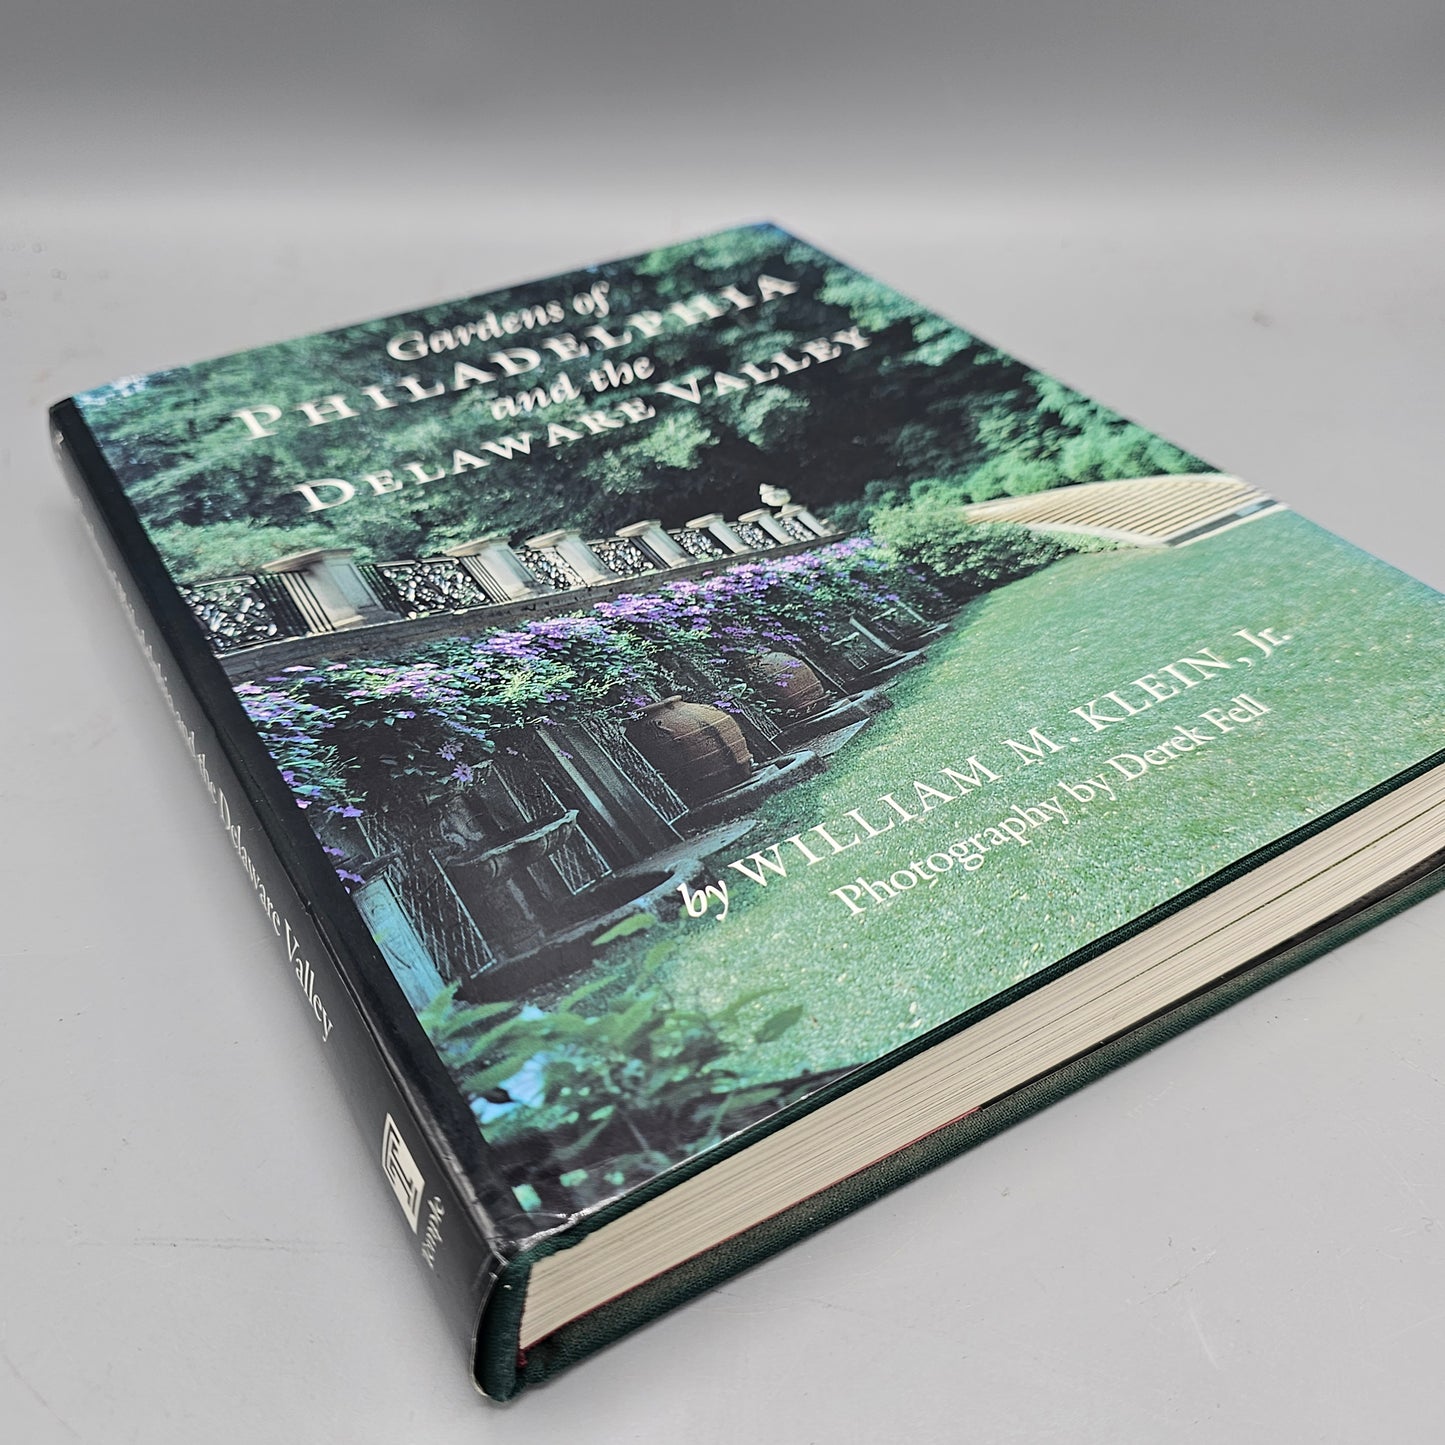 Gardens Of Philadelphia and the Delaware Valley by William M. Klein Jr.